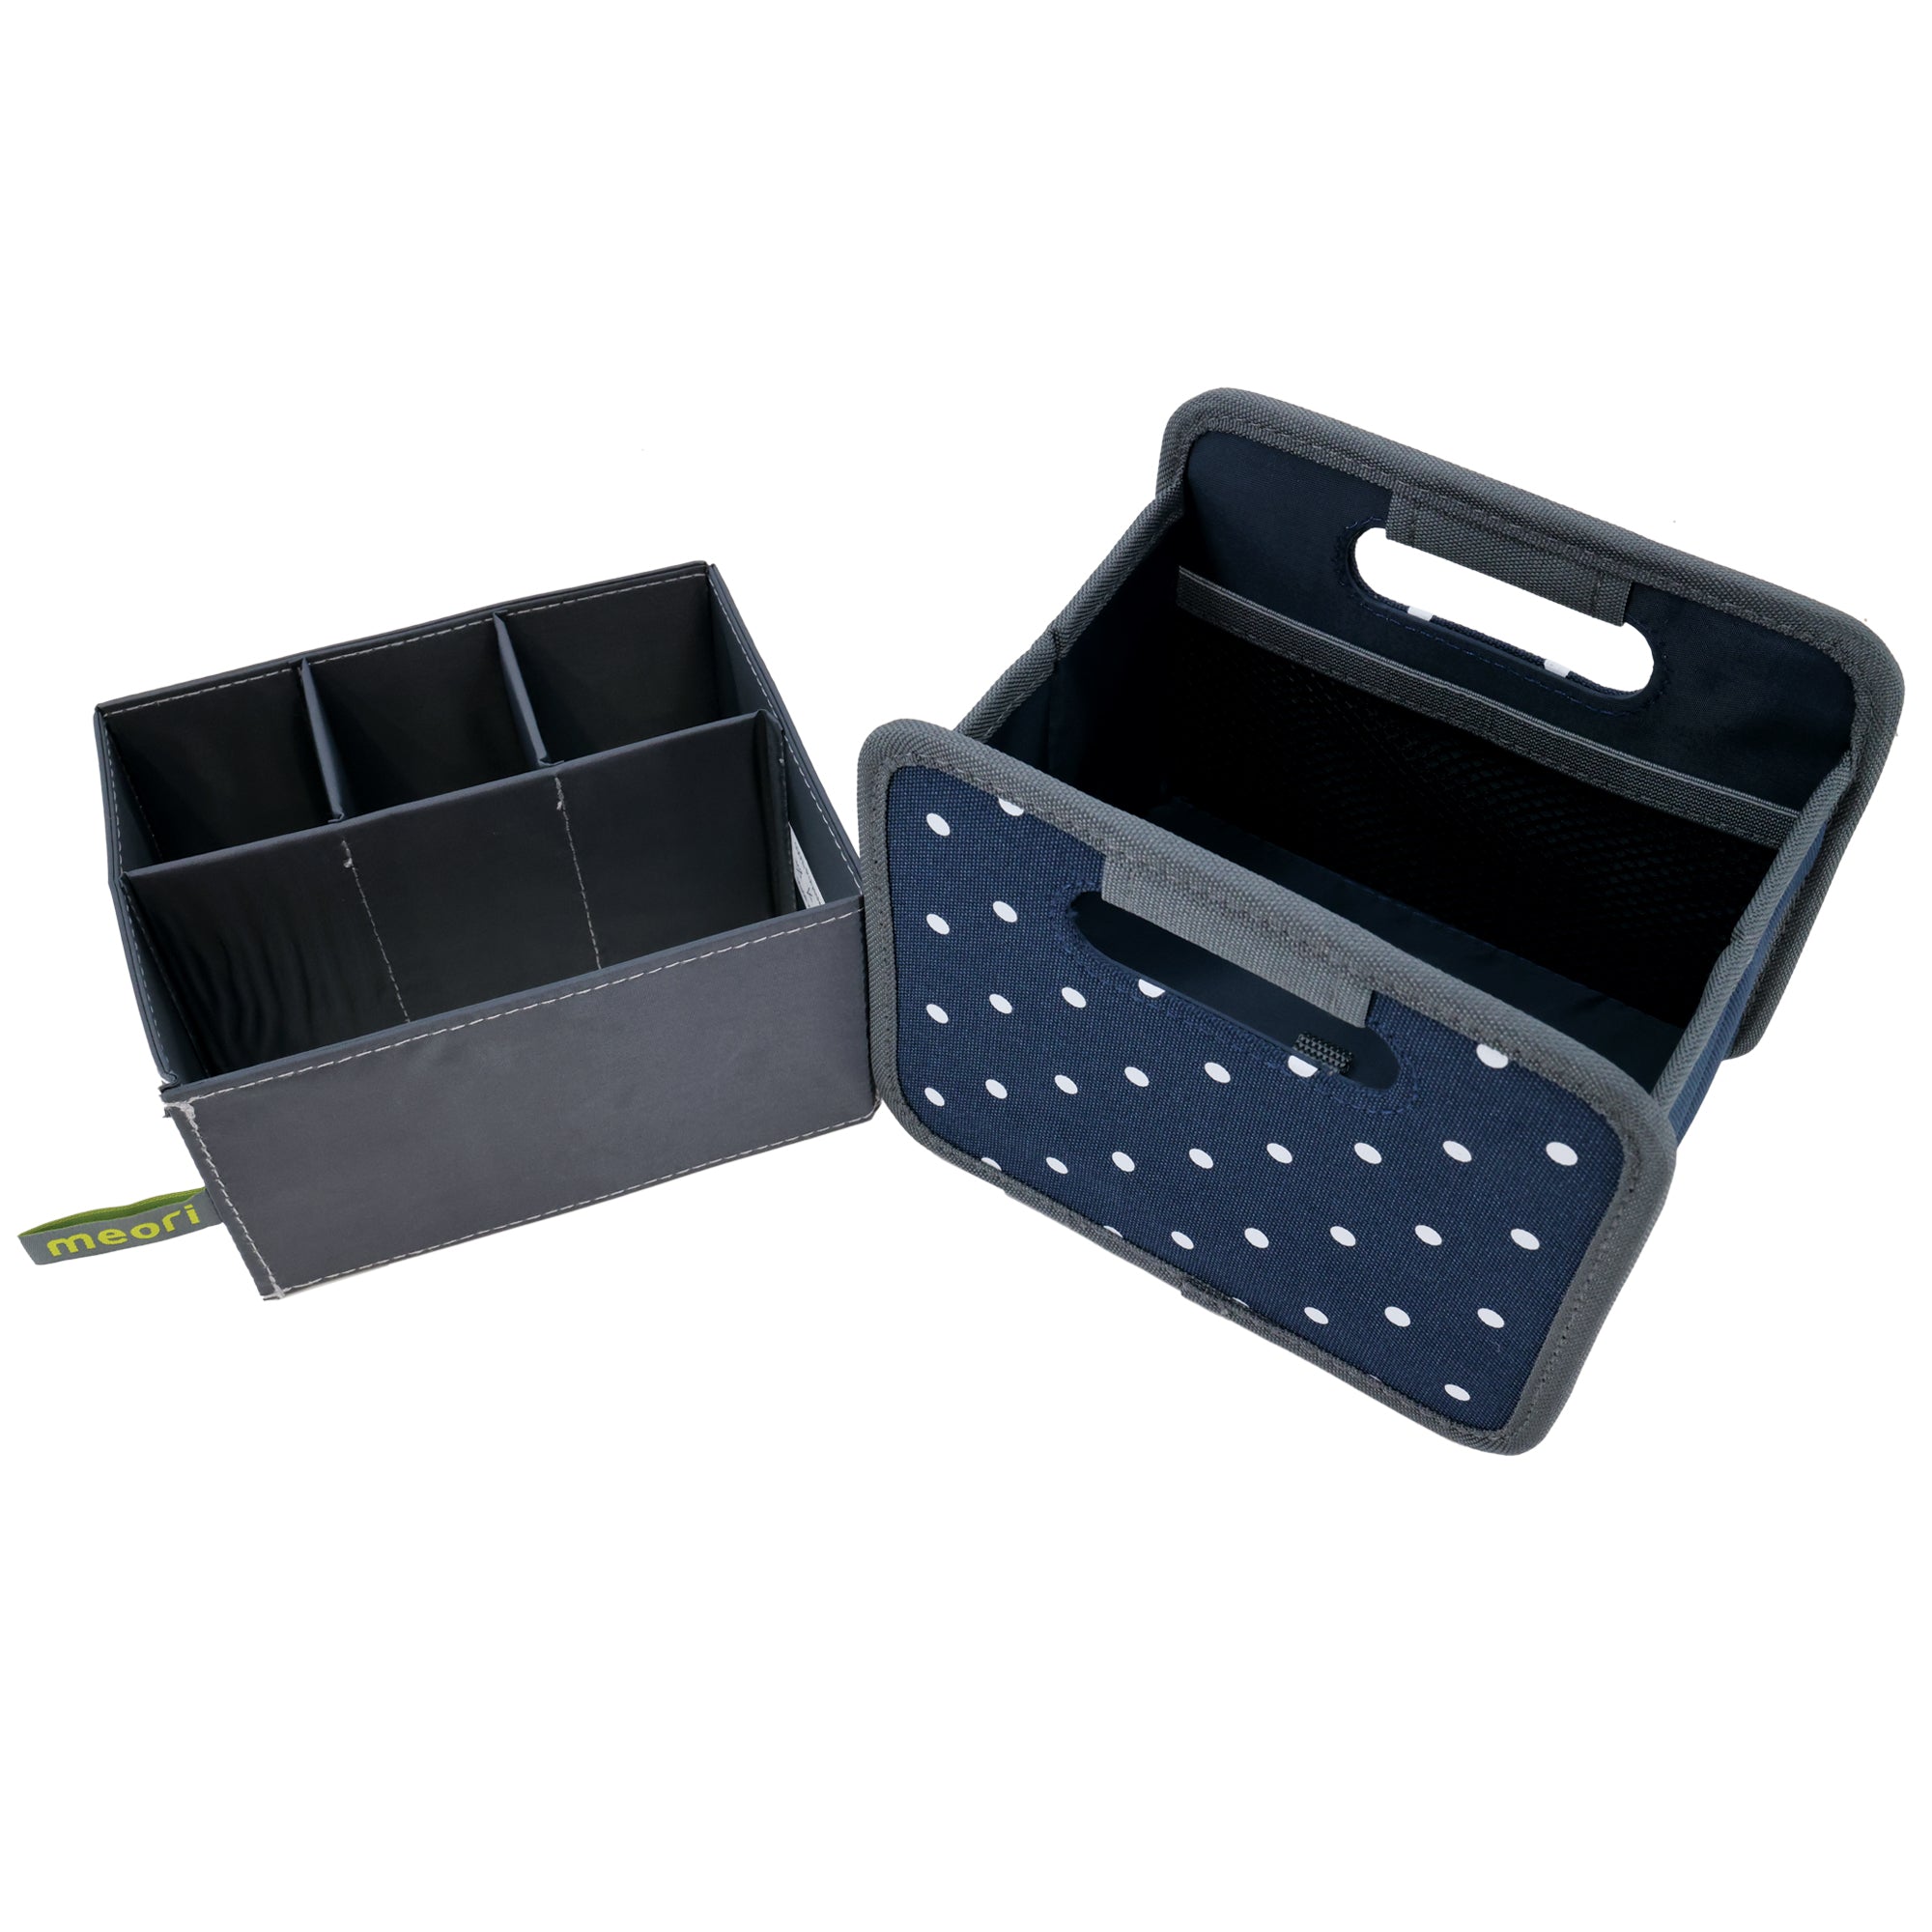 Navy blue with white polka dots colored Meori storage box with navy blue insert beside it, both open.